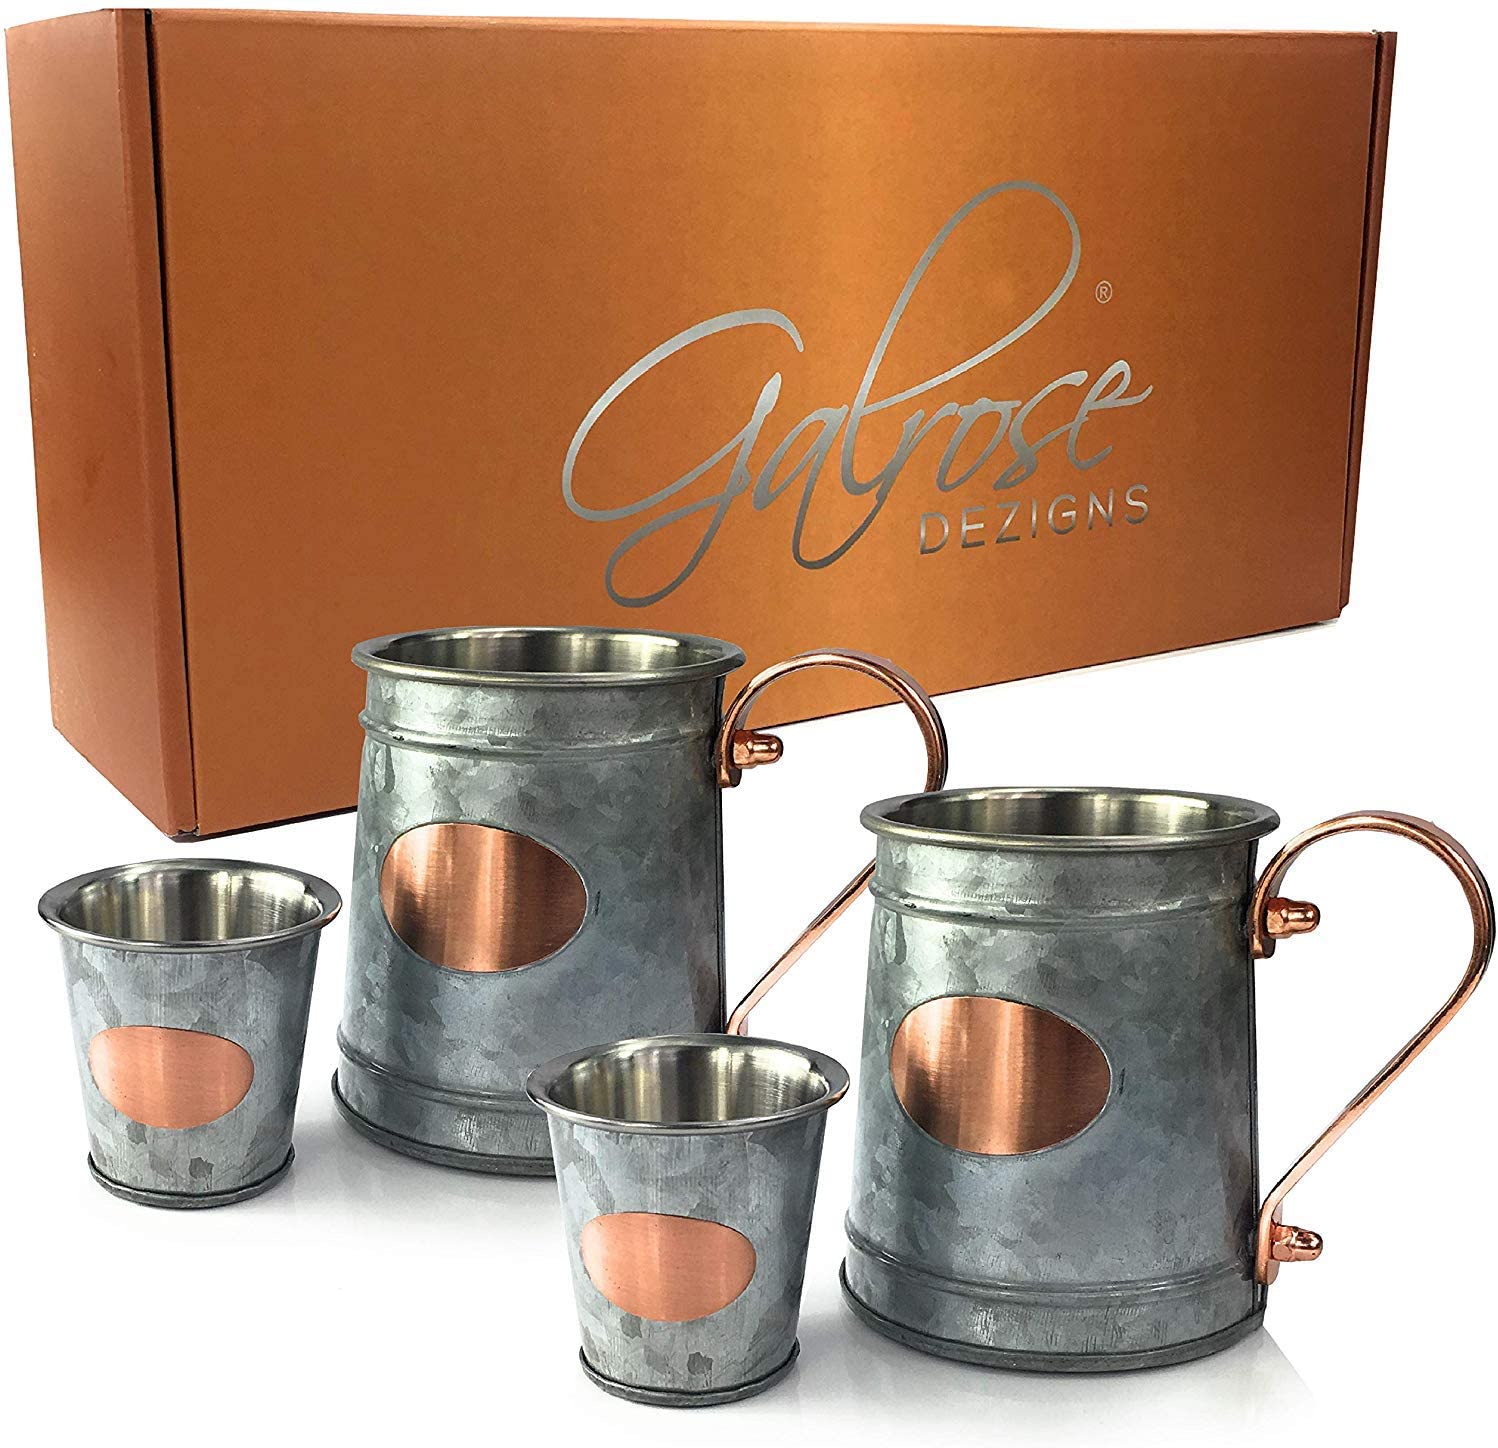 Galrose Galvanized Iron Beer Stein - Rose Gold Plaque 16 oz Stainless Steel Double Wall Beer Mug. 2 Rustic Moscow Mule Mugs + 2 Shot Glasses for Parties. Unique 6th Iron Anniversary Gifts for Him